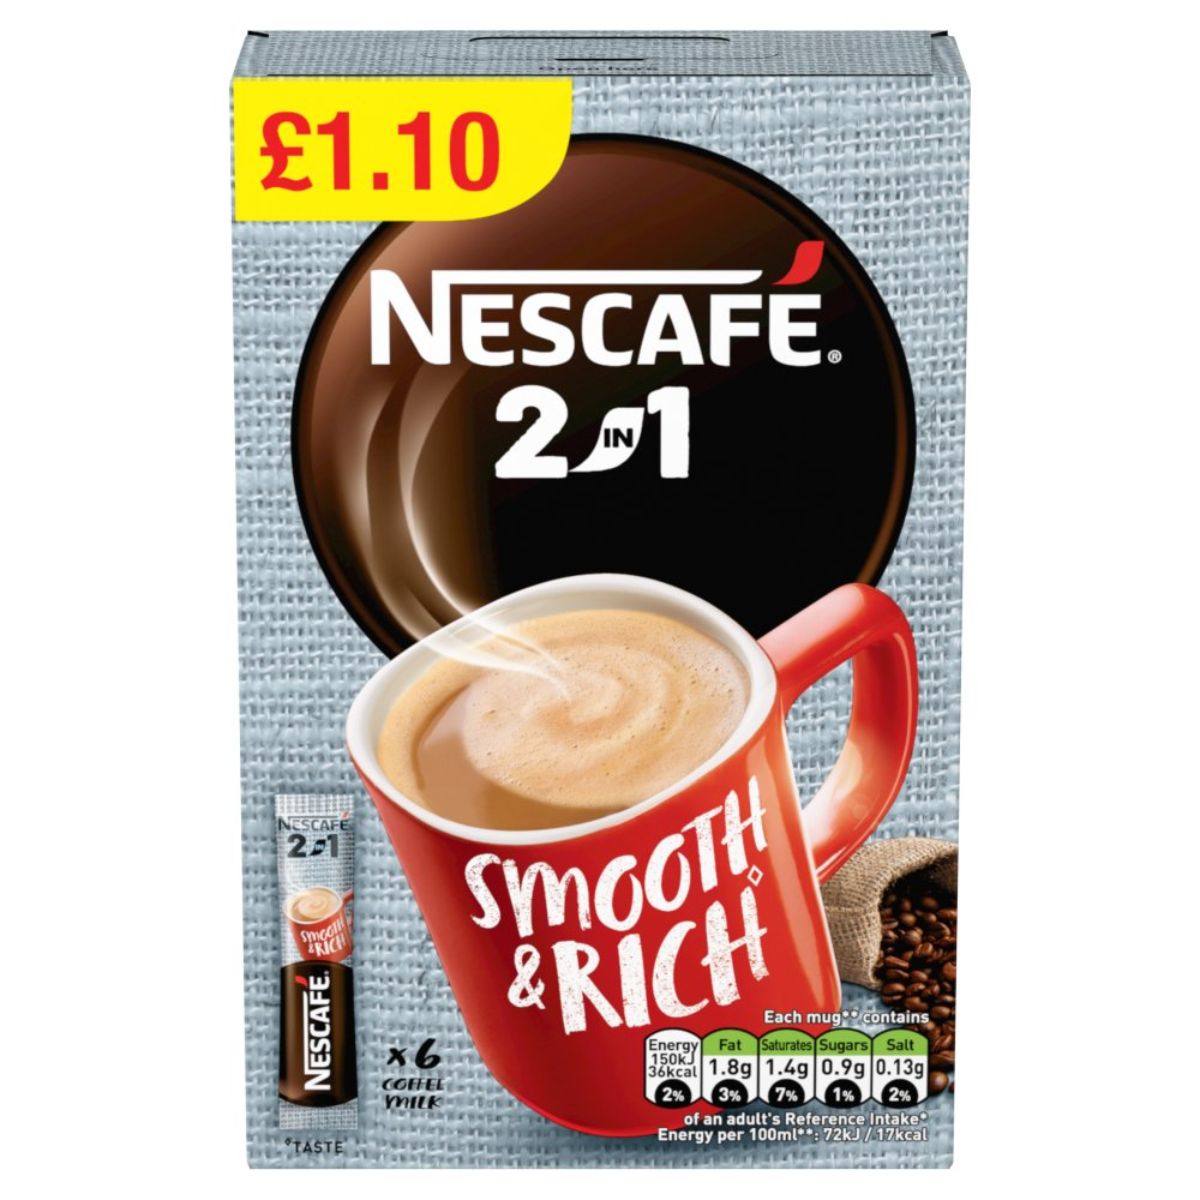 Nescafe - 2in1 Instant Coffee - 6x9g smooth & rich coffee.